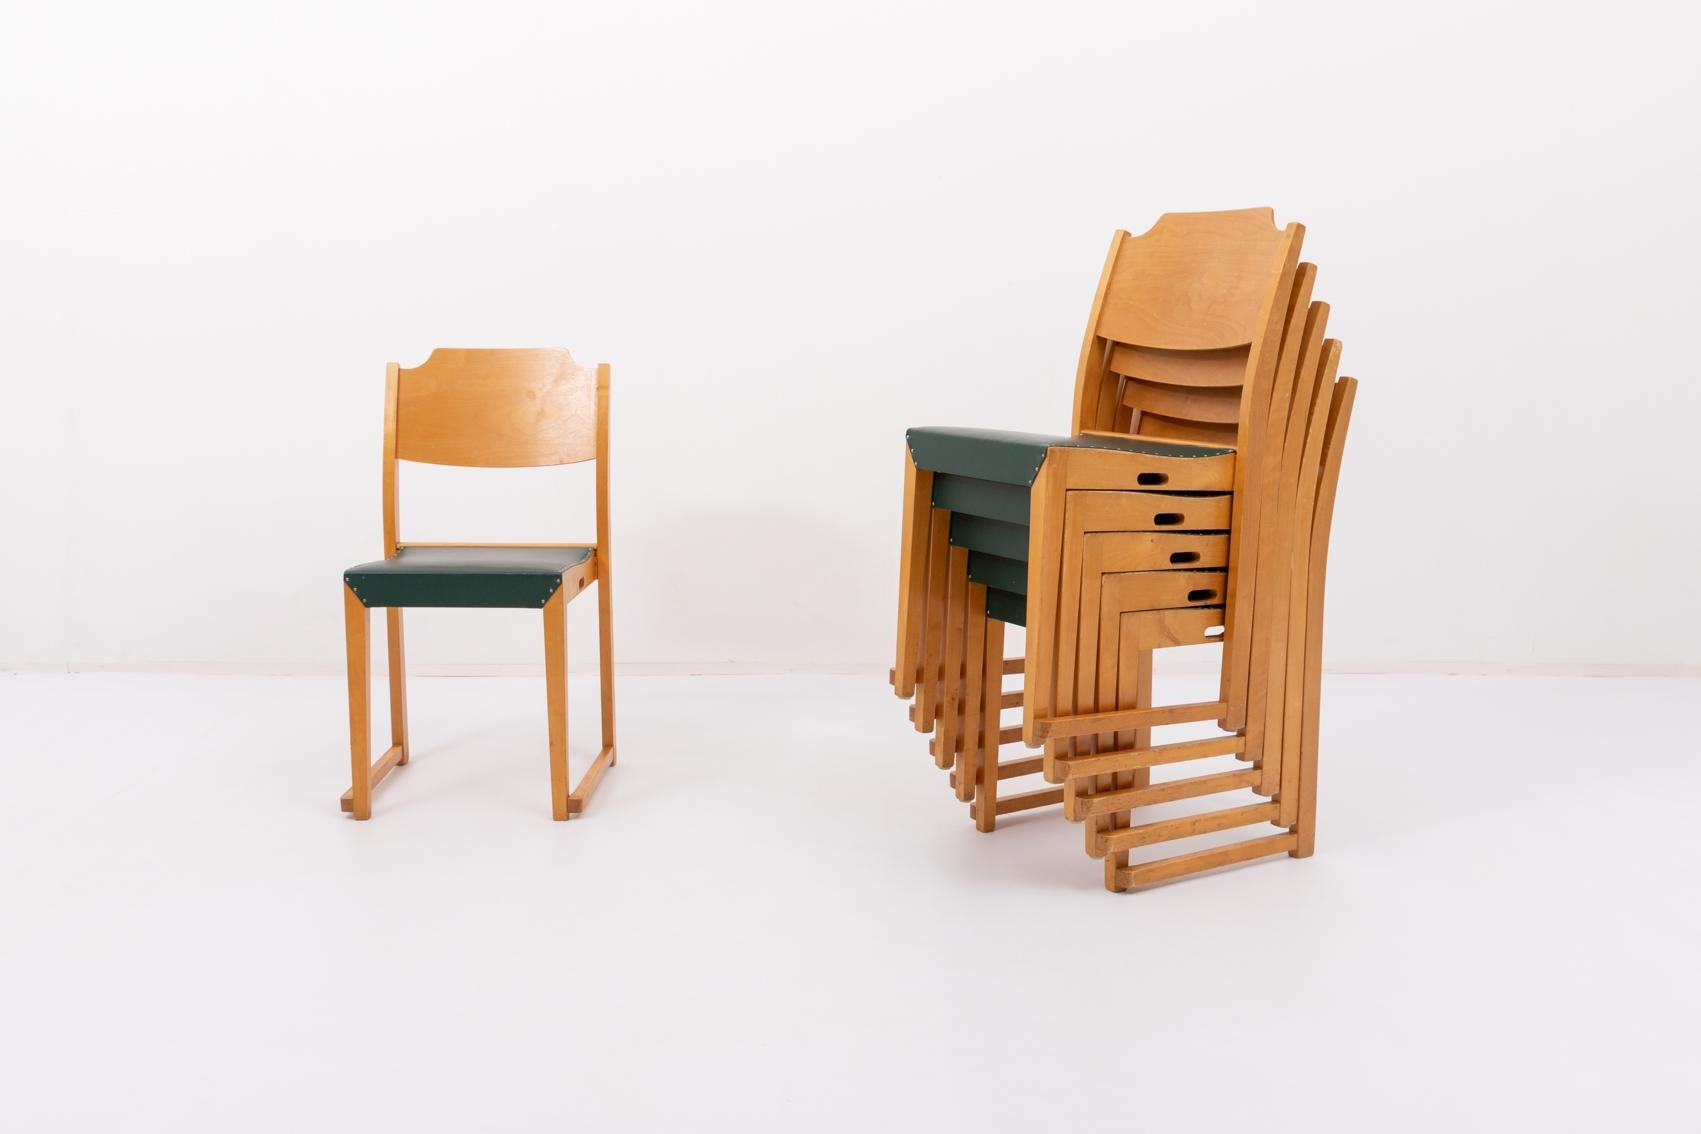 Set of six stackable chairs designed by Herman Seeck for Asko, Finland 1950s. It has a varnished birch frame with green galon seat upholstery.

Priced per set of 6.

Condition
Good, age related wear and marks

Dimensions
width: 45 cm
height: 85